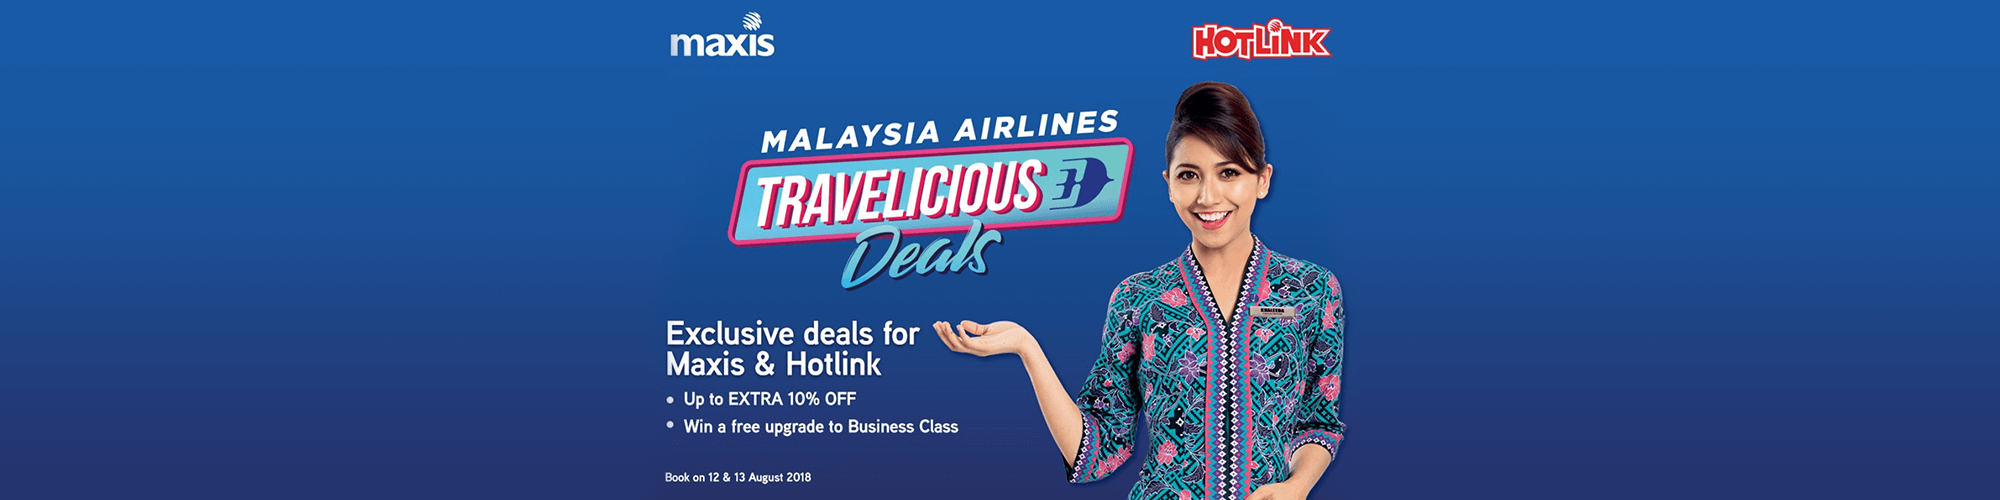 More discounts on Malaysia Airlines flight bookings exclusively for Maxis & Hotlink customers